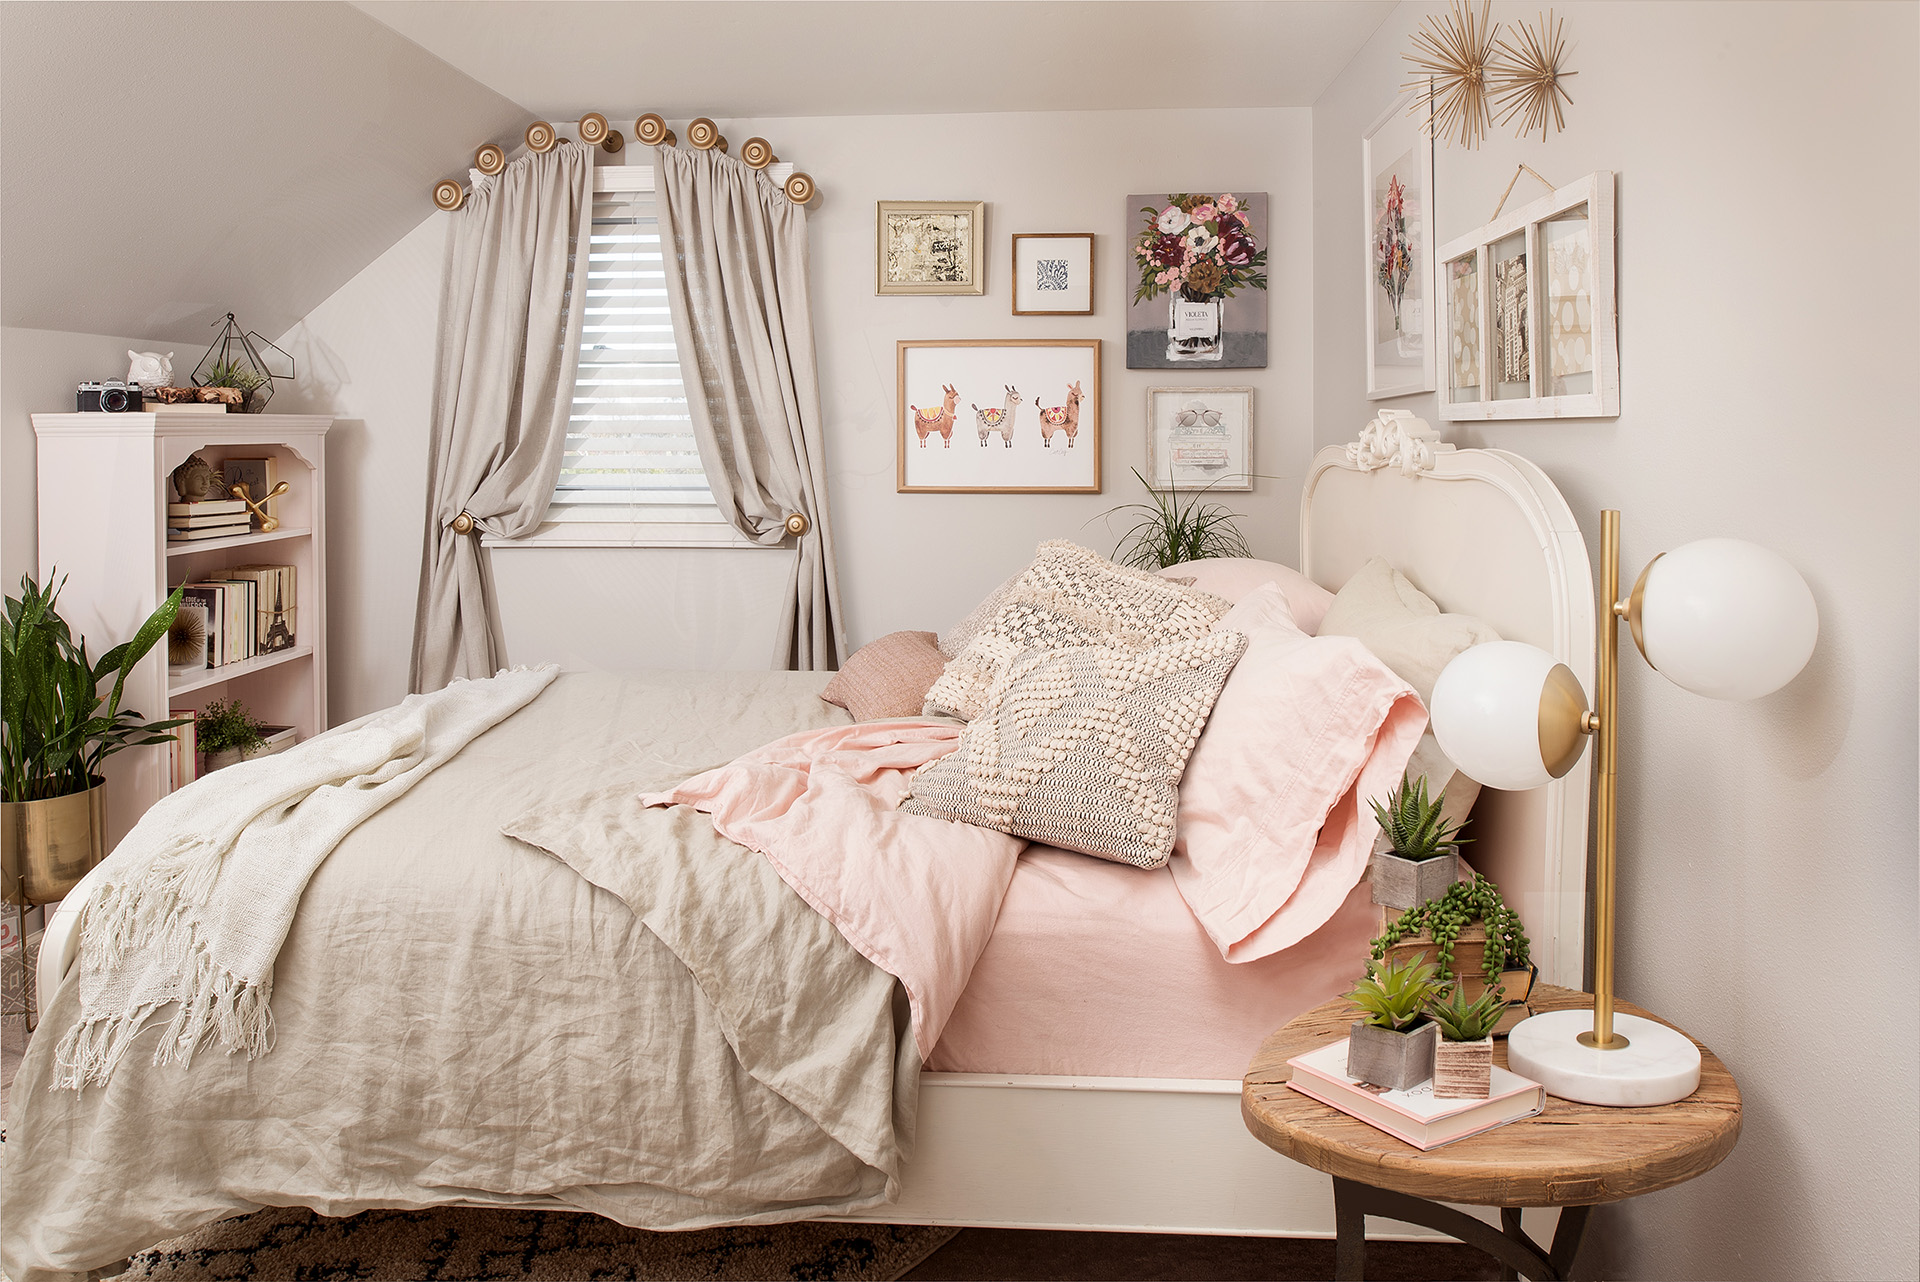 Helping your teen transform an outdated bedroom scheme